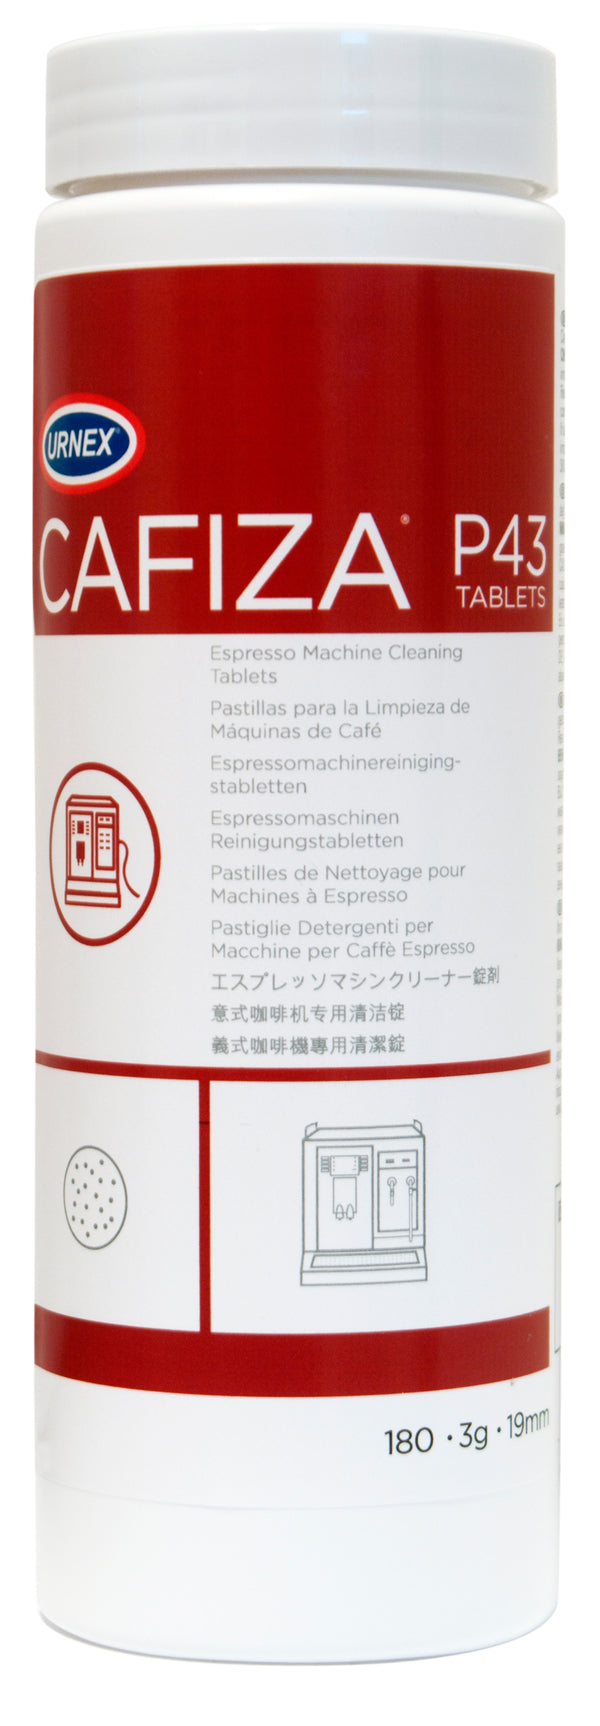 Urnex Cafiza P43 Automatic Coffee Machine Cleaning Tablets 3g x 19mm (Cimbali Compatible)